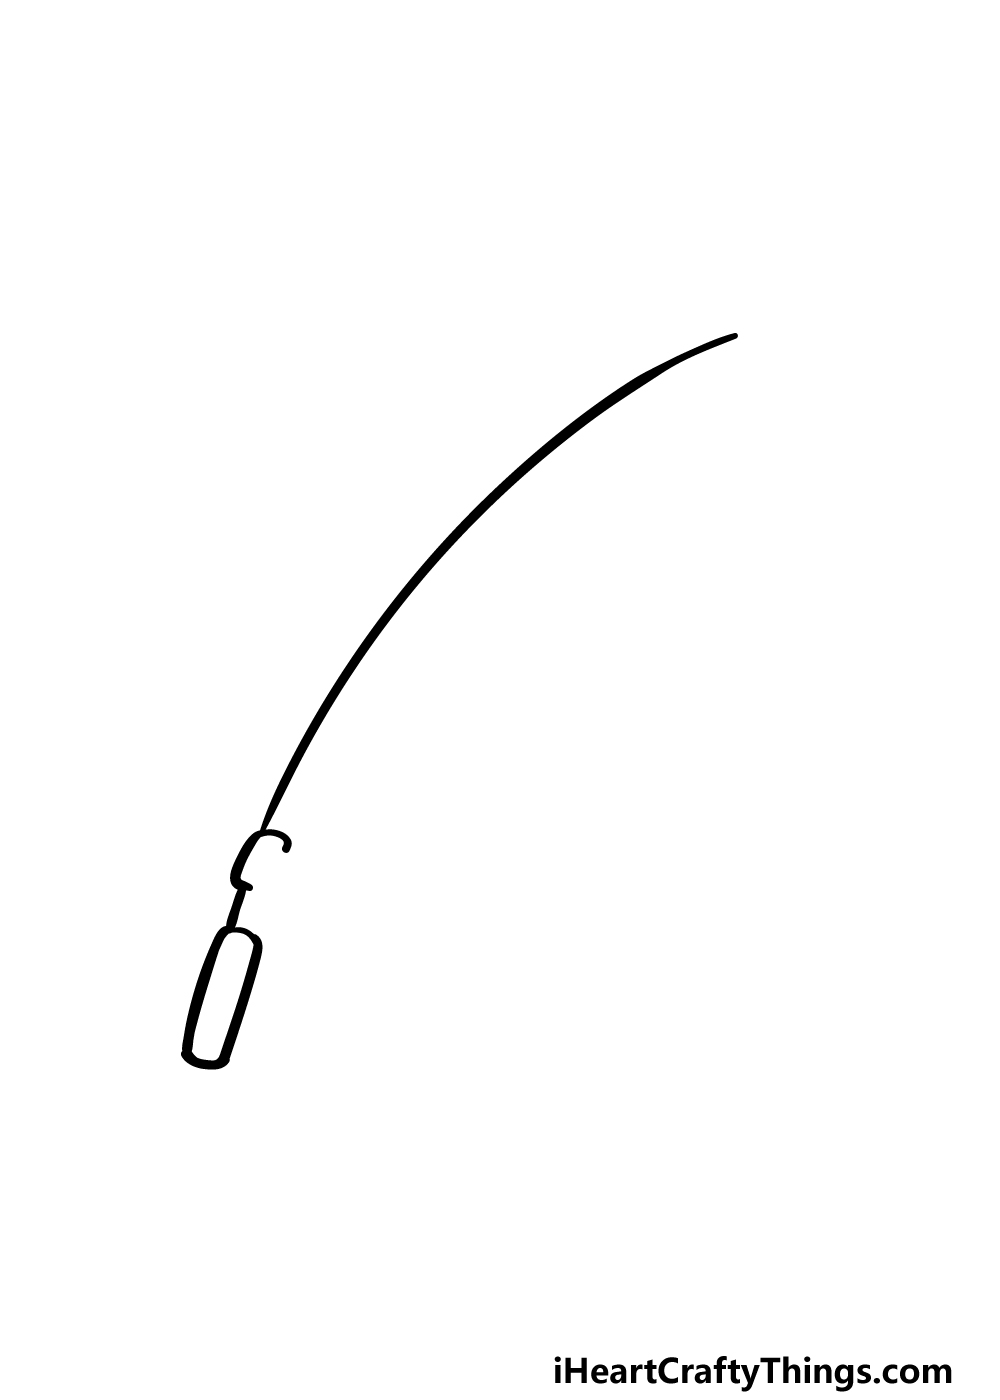 how to draw a fishing pole step 2